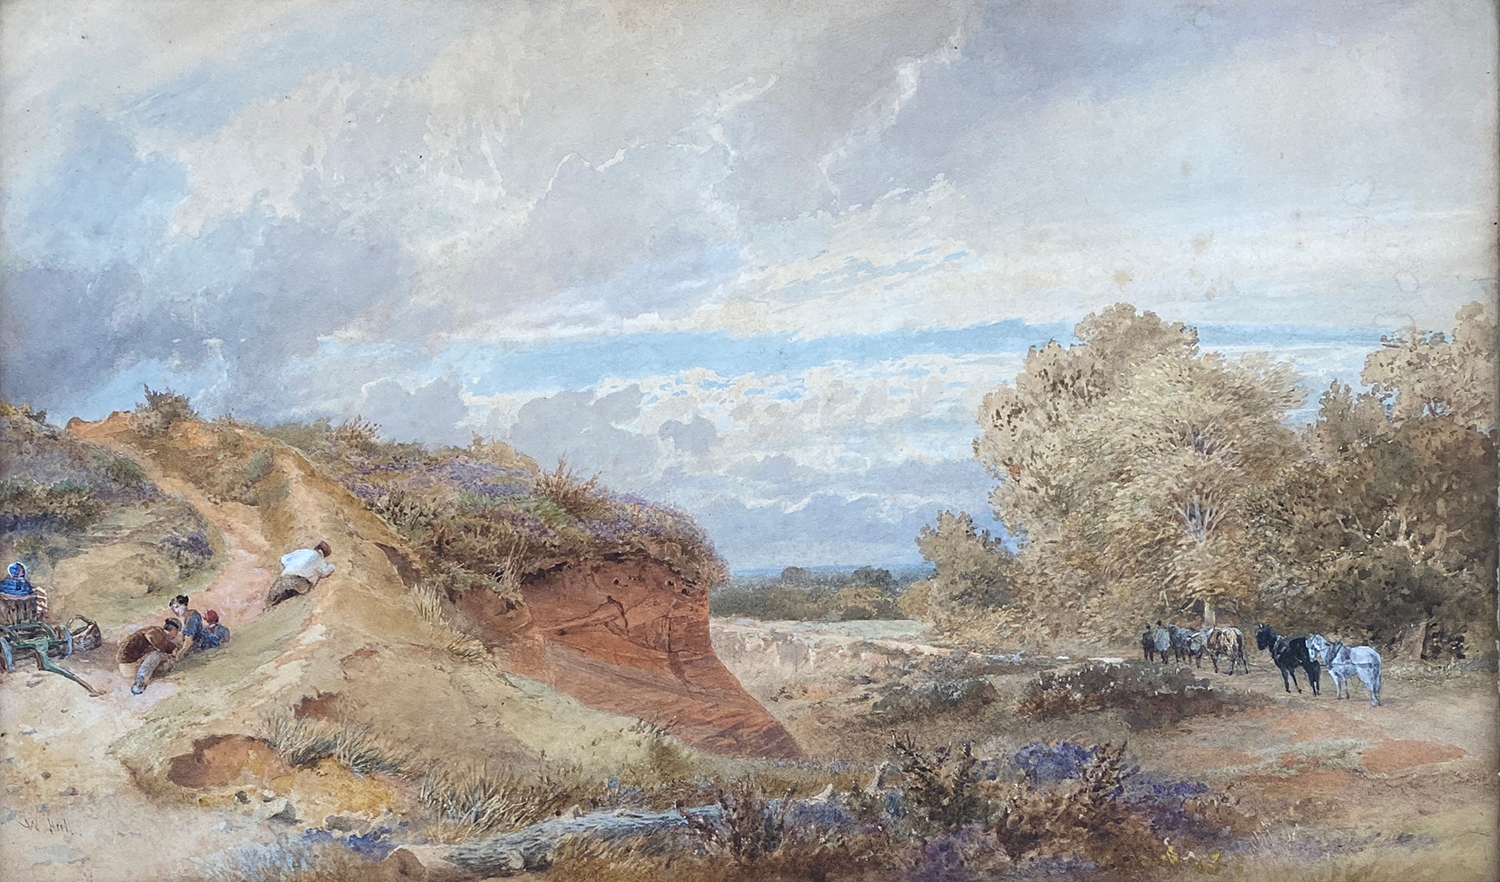 William Hull (1820-1880), 'A Sunny Heath', watercolour on paper, titled and signed in pencil to